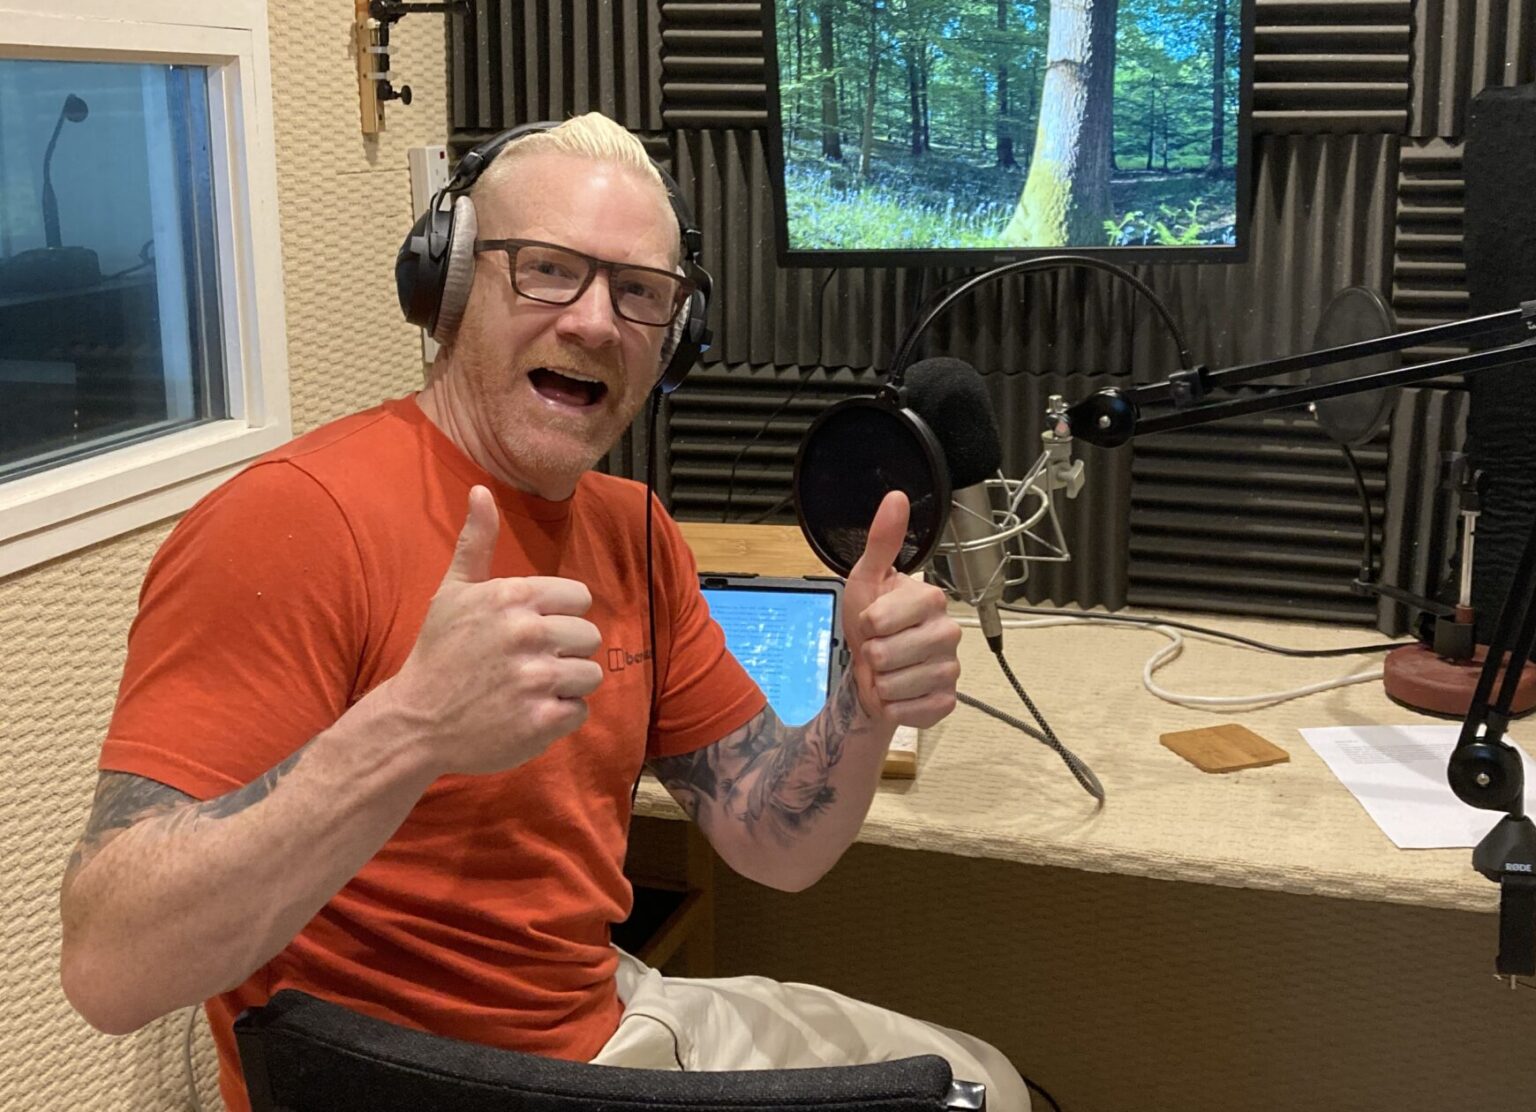 Iwan Thomas MBE, recording his new audio book Brutal in the studio